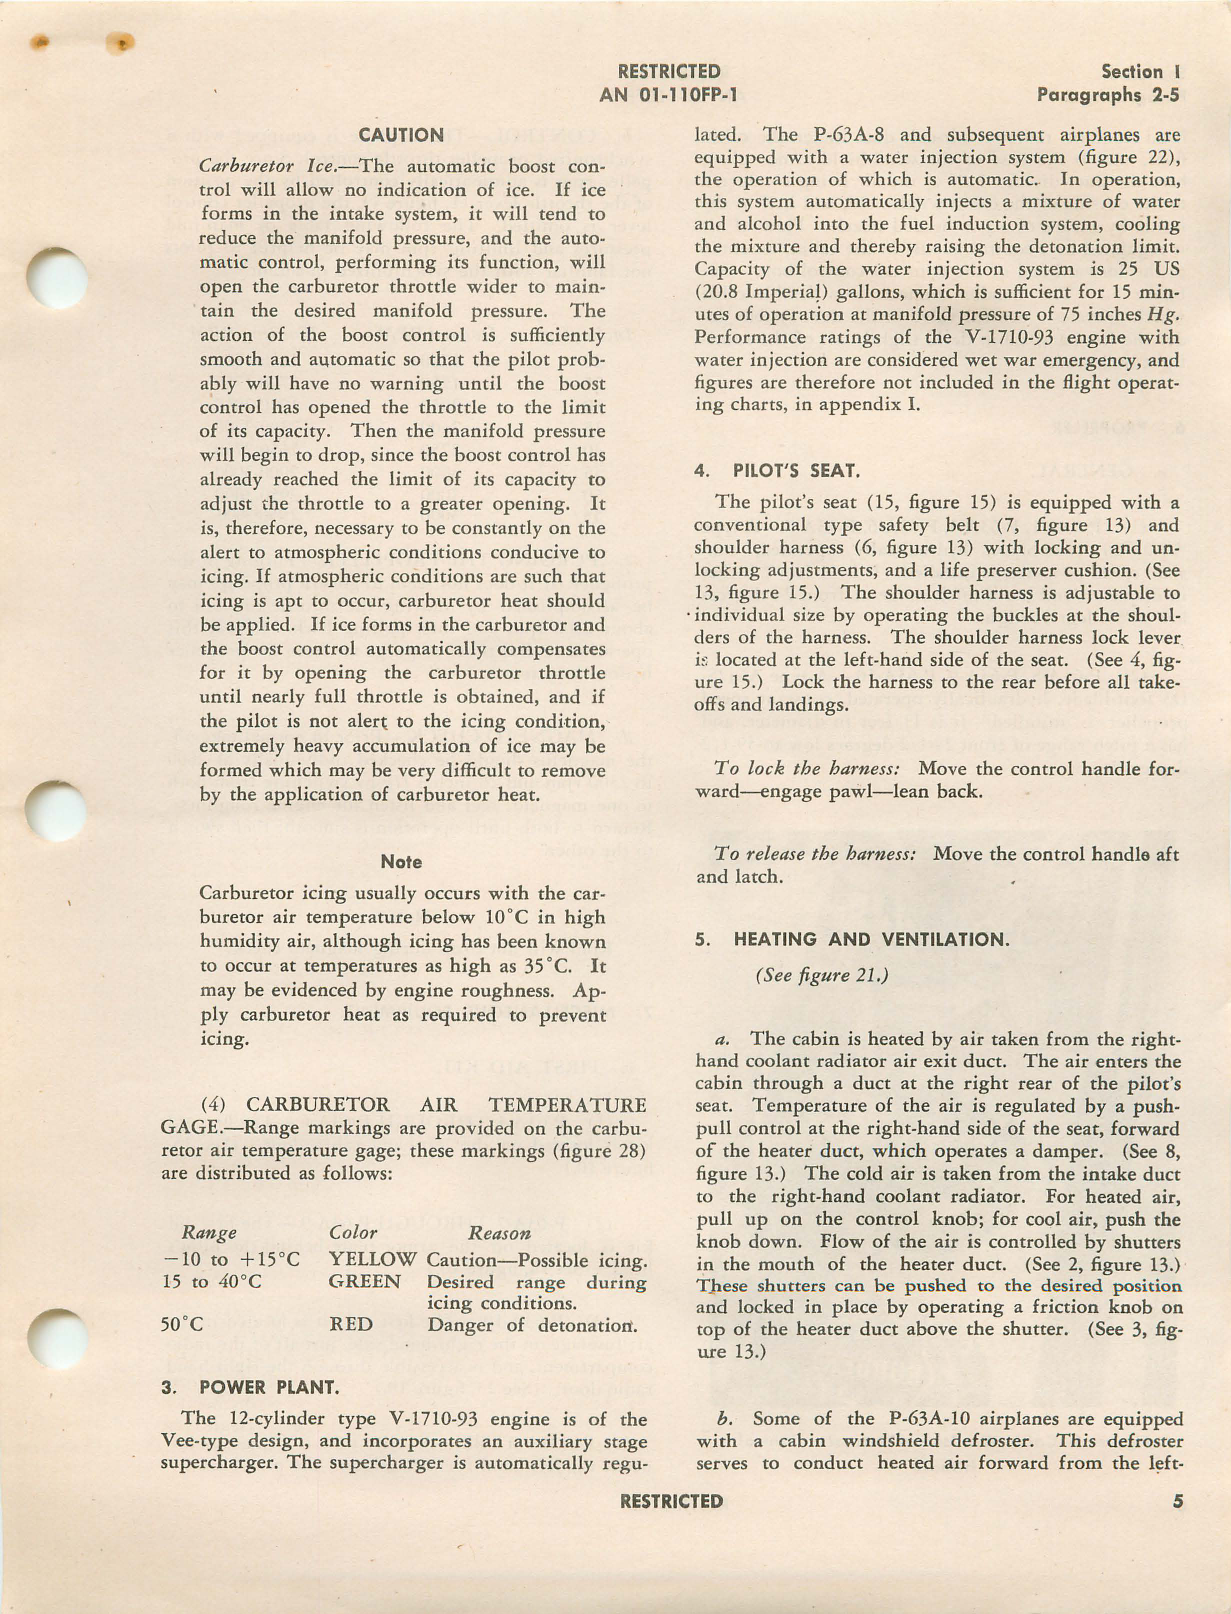 Sample page 9 from AirCorps Library document: Pilot's Flight Operating Instructions for P-63A-1, P-63A-5, P-63A-6, P-63A-7, P-63A-8, P-63A-9, P-63A-10